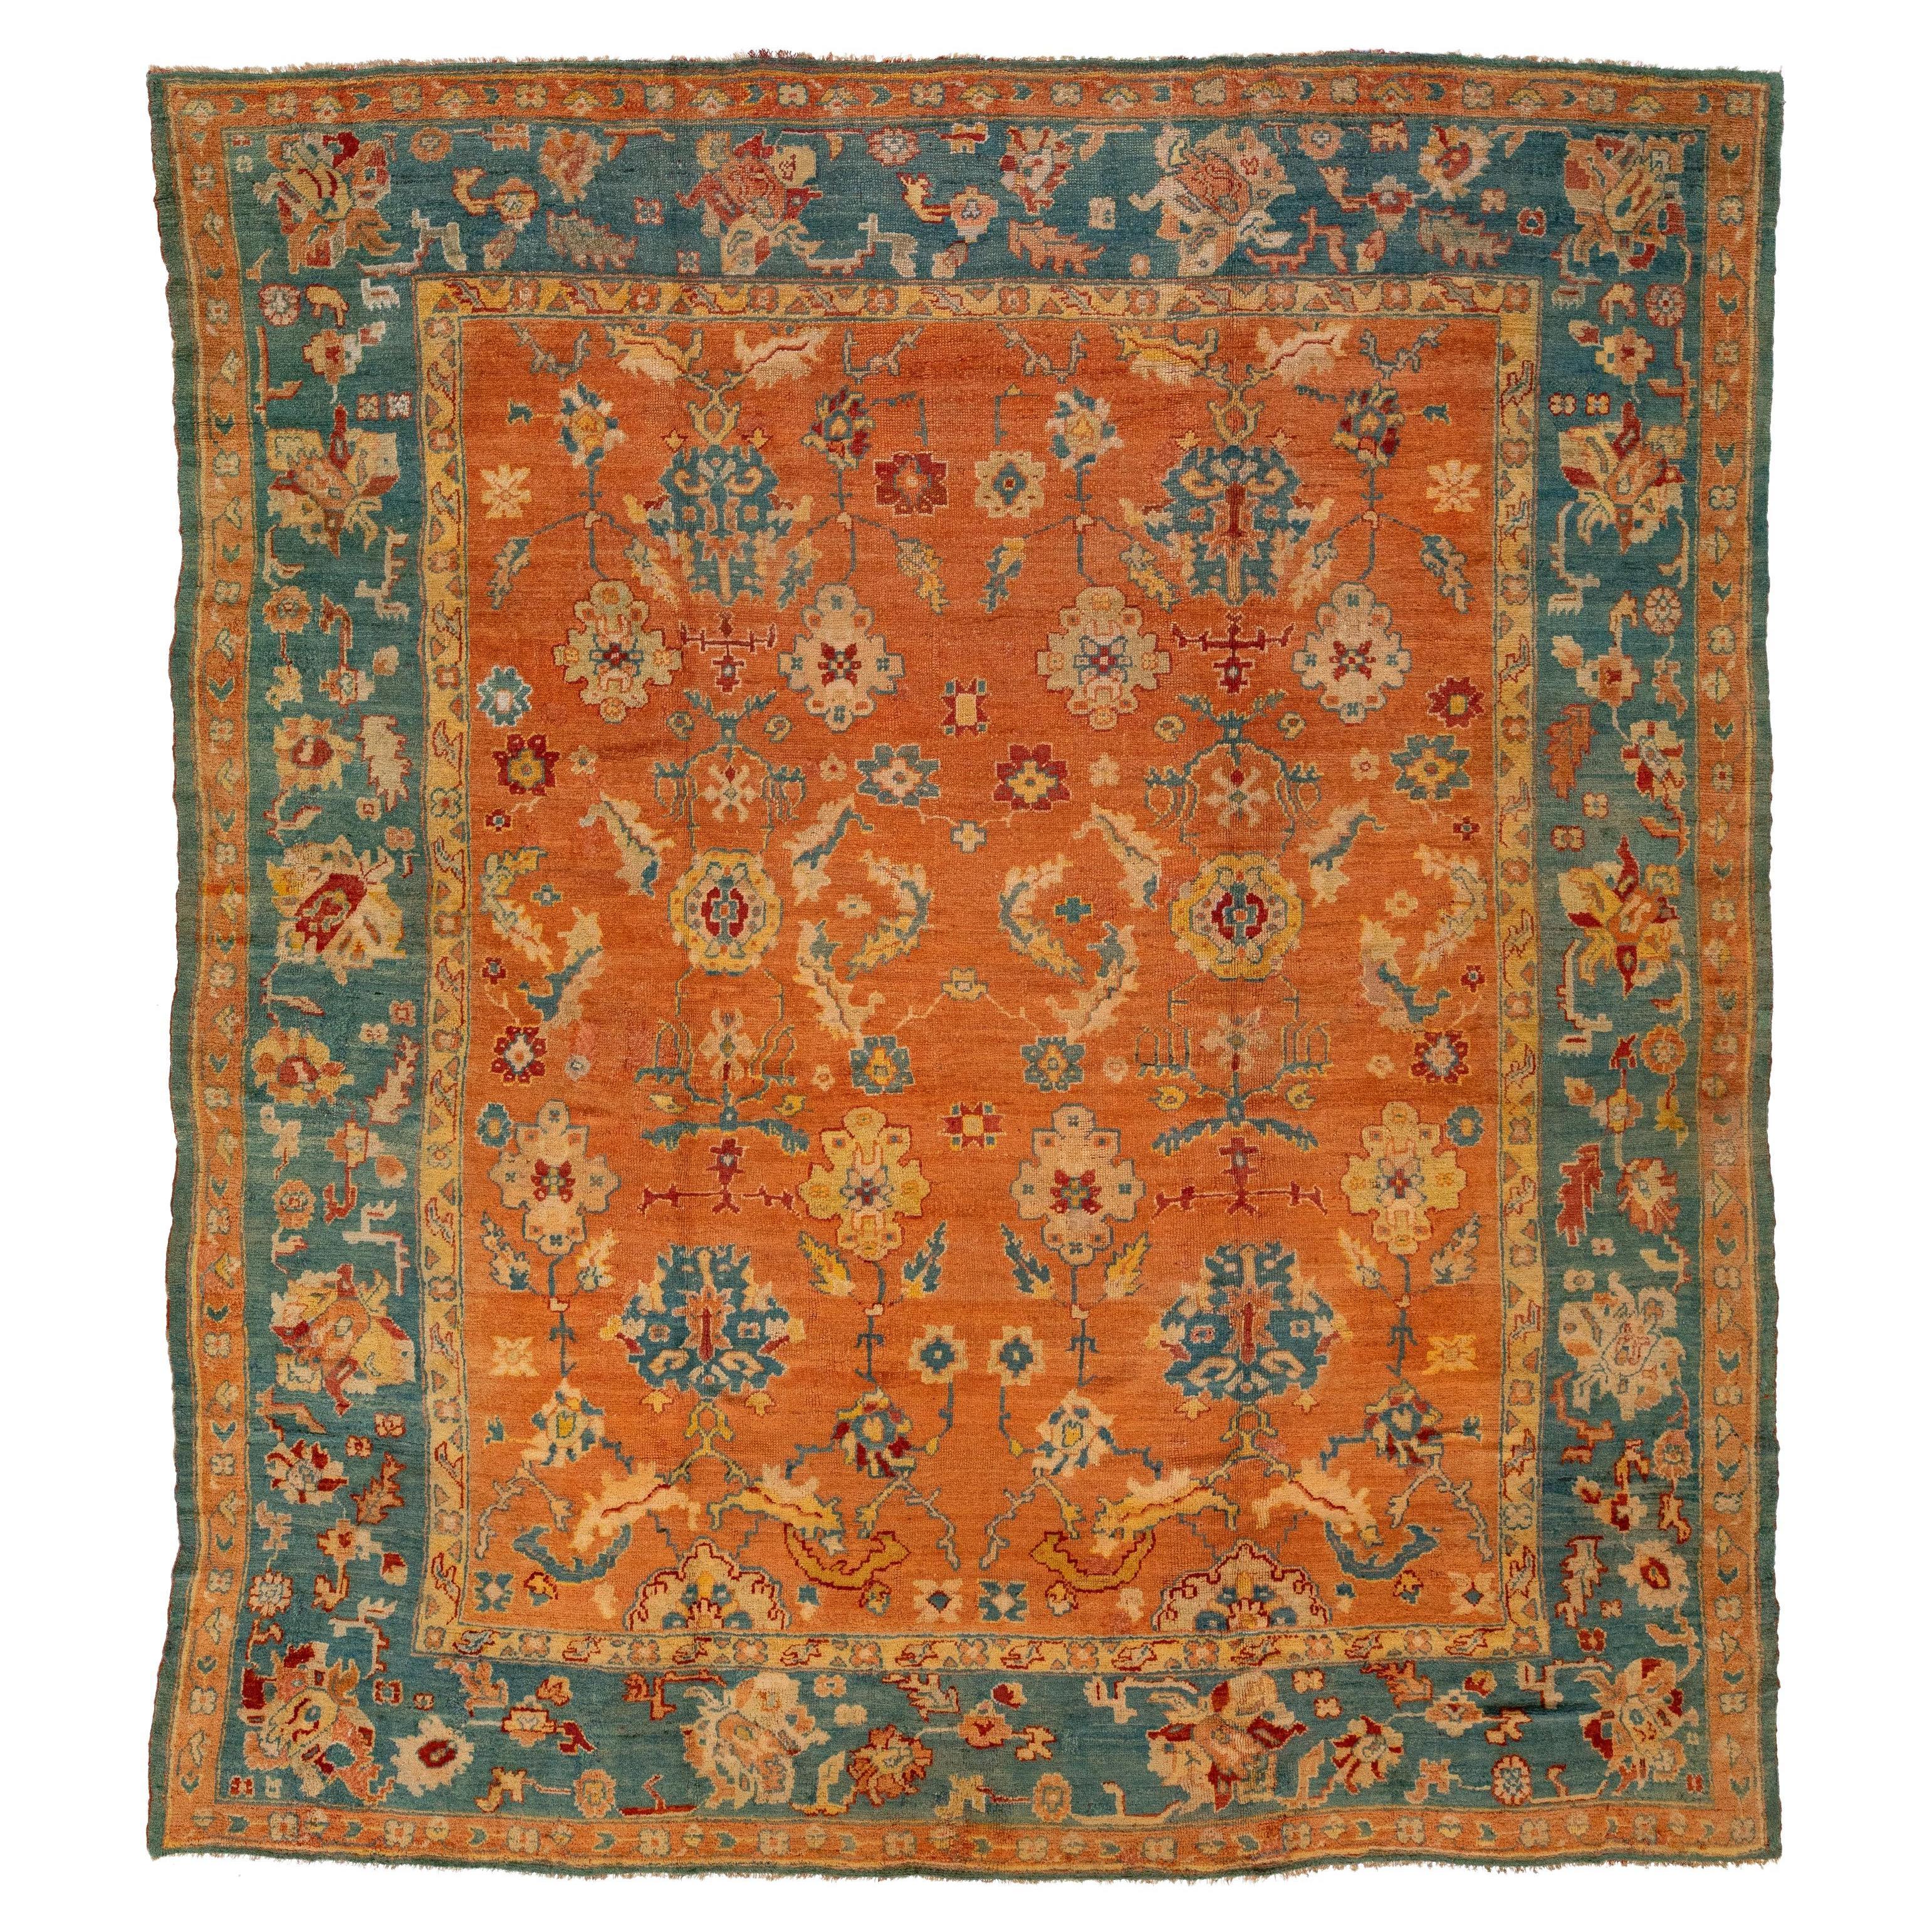 Orange and Blue Antique Turkish Oushak Wool Rug Handmade From the 1880s For Sale